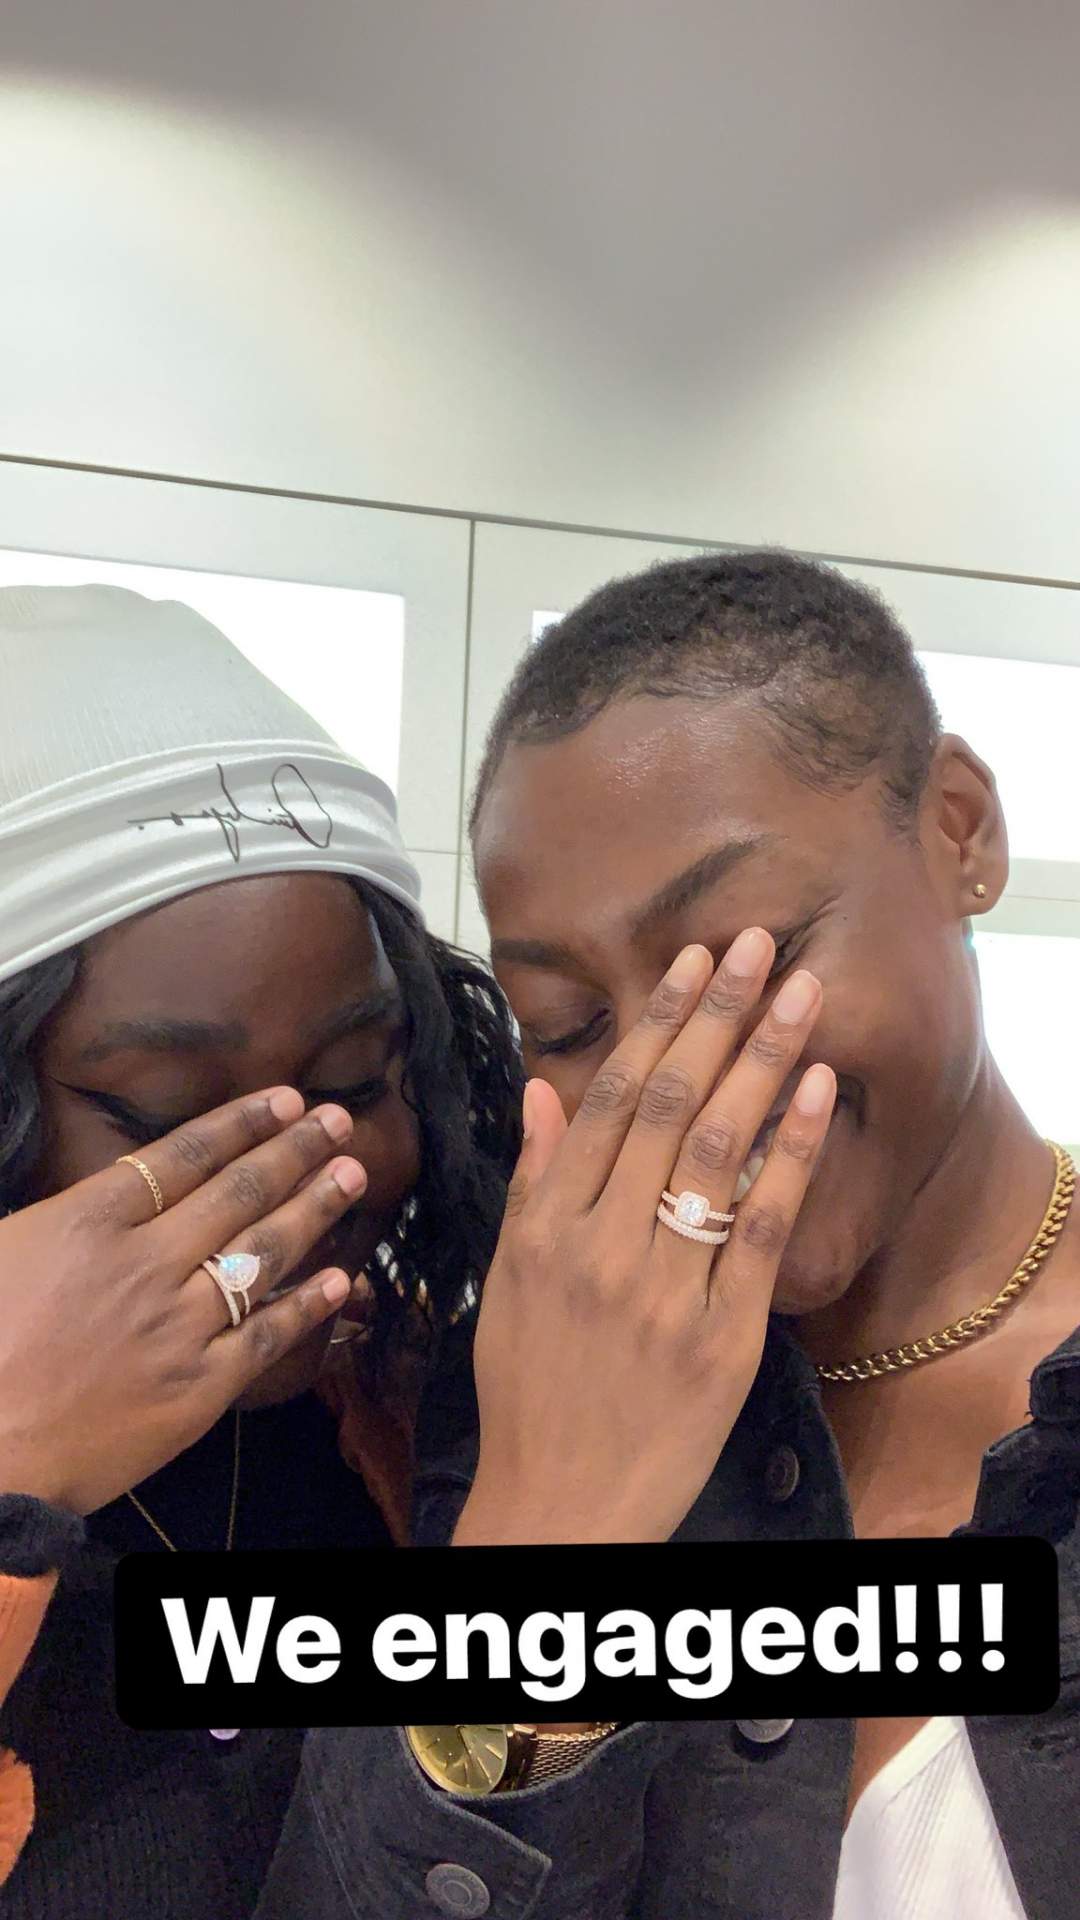 Two ladies show off their rings to announce their engagement to each other